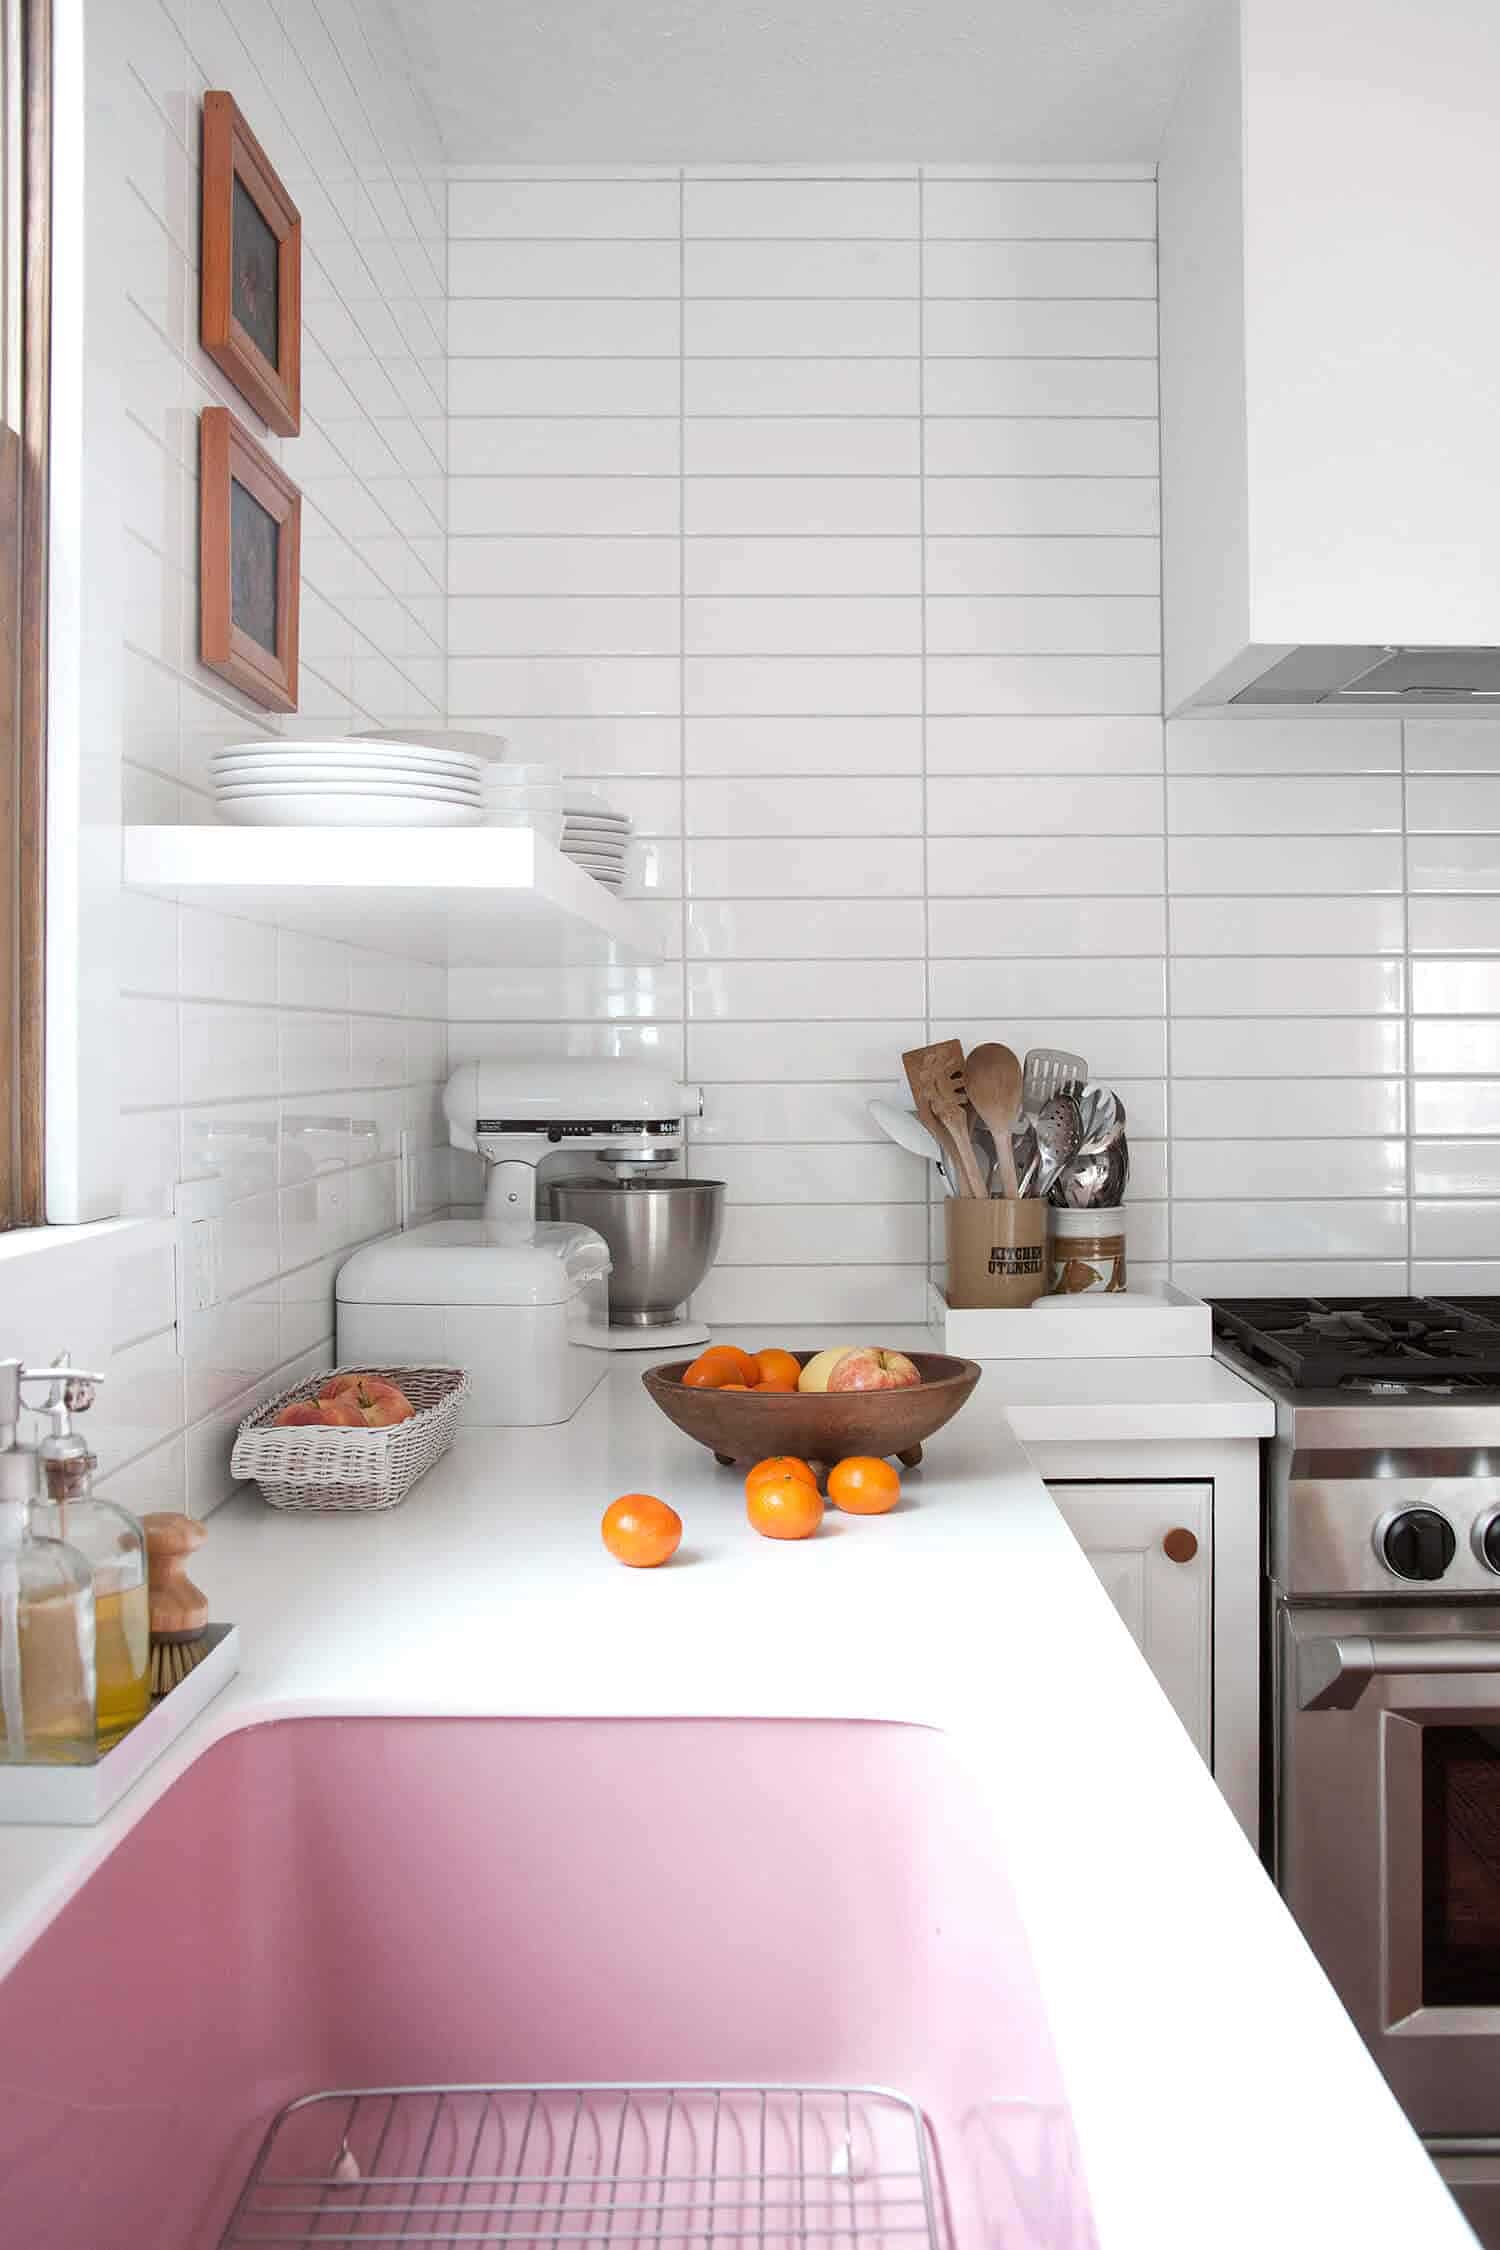 All white kitchen with a link pink and a bowl of oranges on the counter | Inspiration for Stacked Tile, stacked bond tile pattern, via Yellow Brick Home